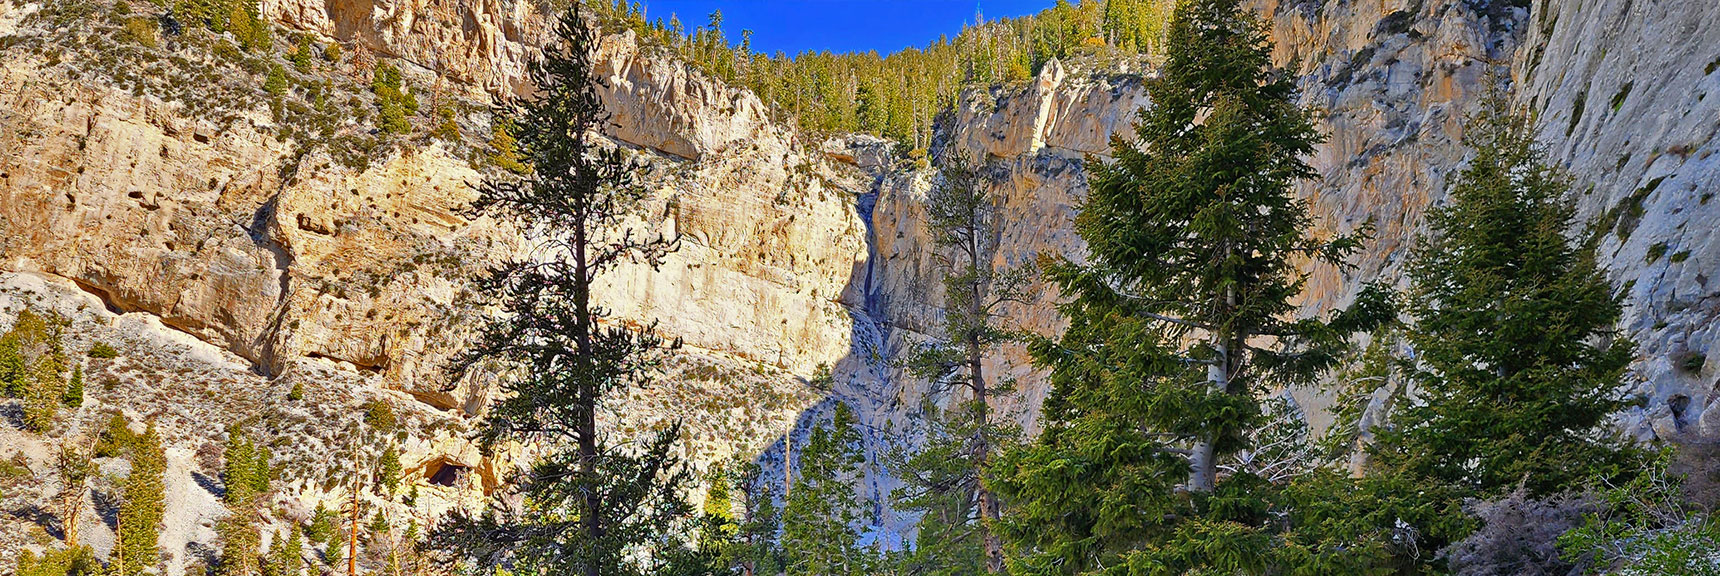 First View of the Falls. Sound Increasing in Volume. Heavy Winter Snowmelt | Mary Jane Falls | Mt. Charleston Wilderness | Spring Mountains, Nevada